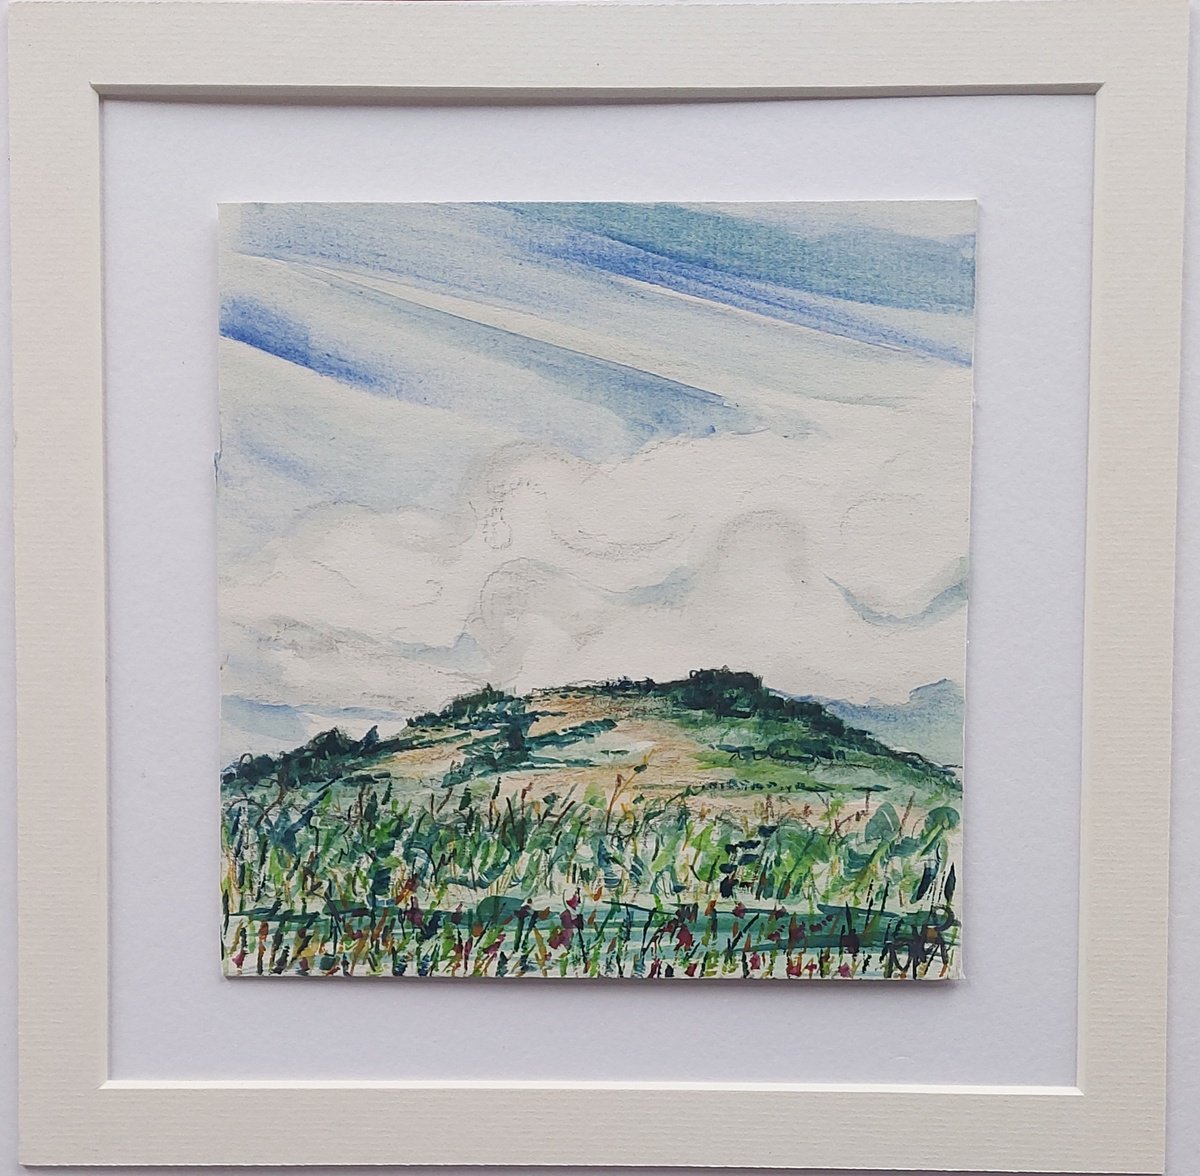 Wexford Daze - summer morning over Tara Hill by Niki Purcell - Irish Landscape Painting